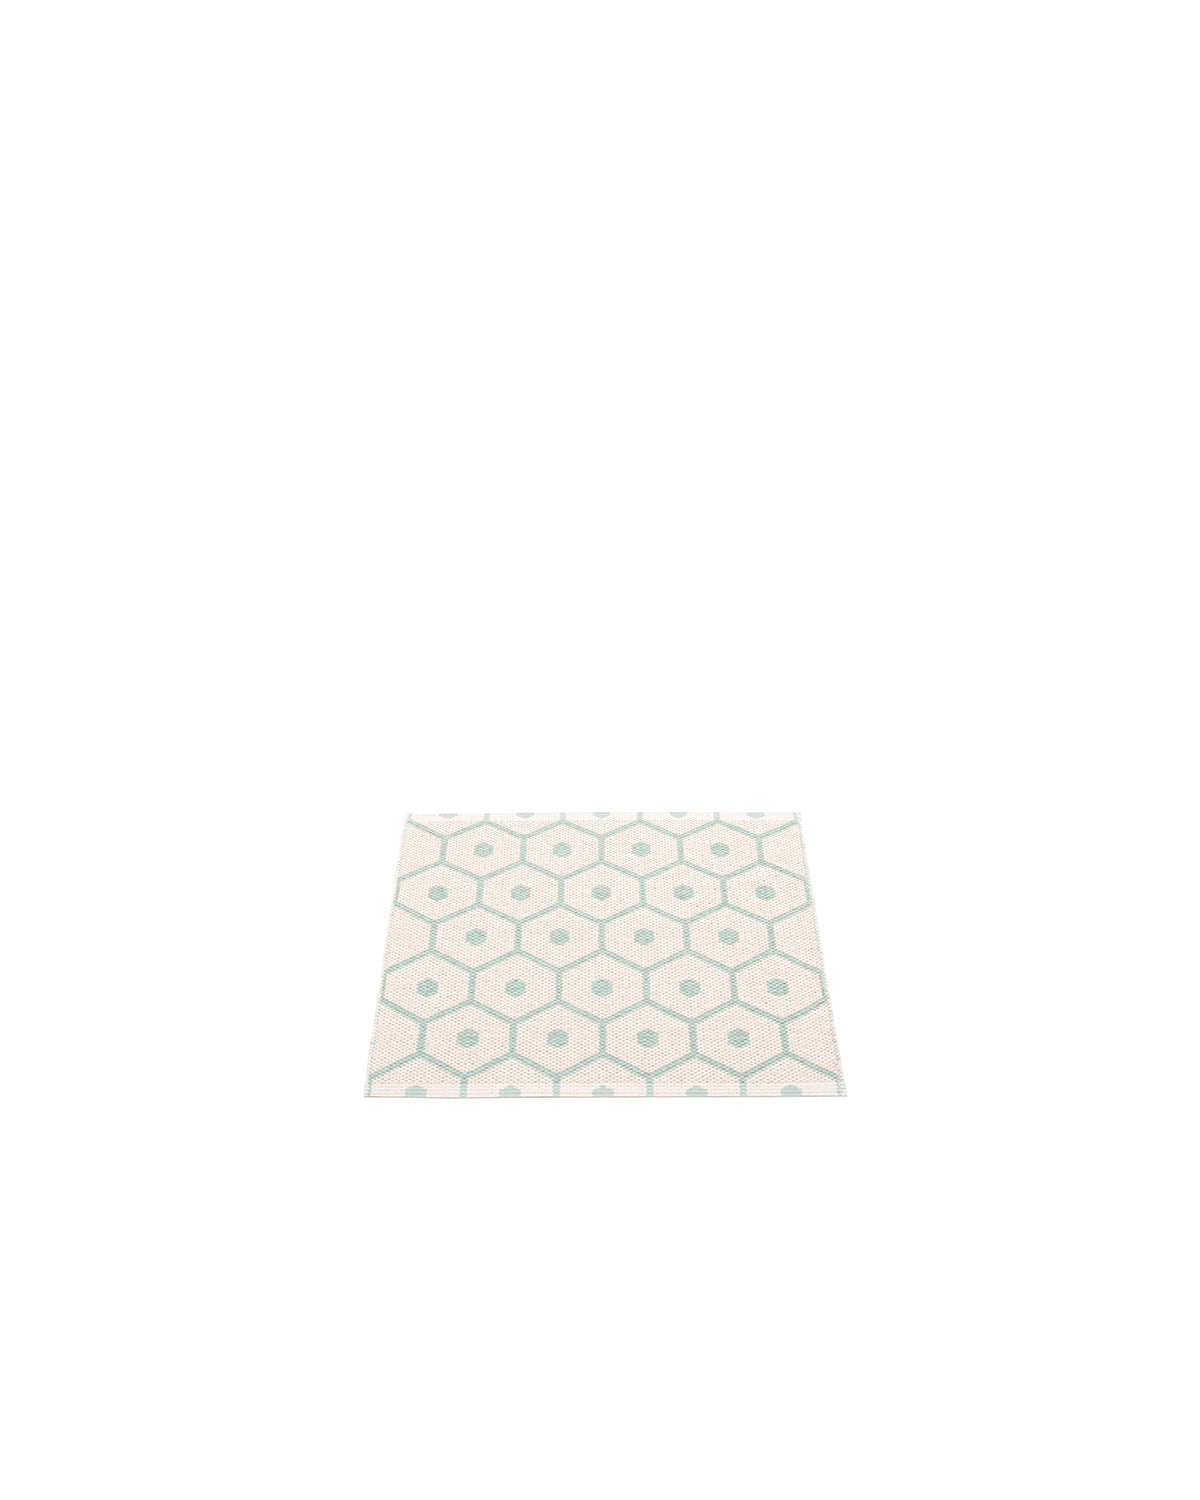 Pappelina Rug HONEY Pale Turquoise  image 4